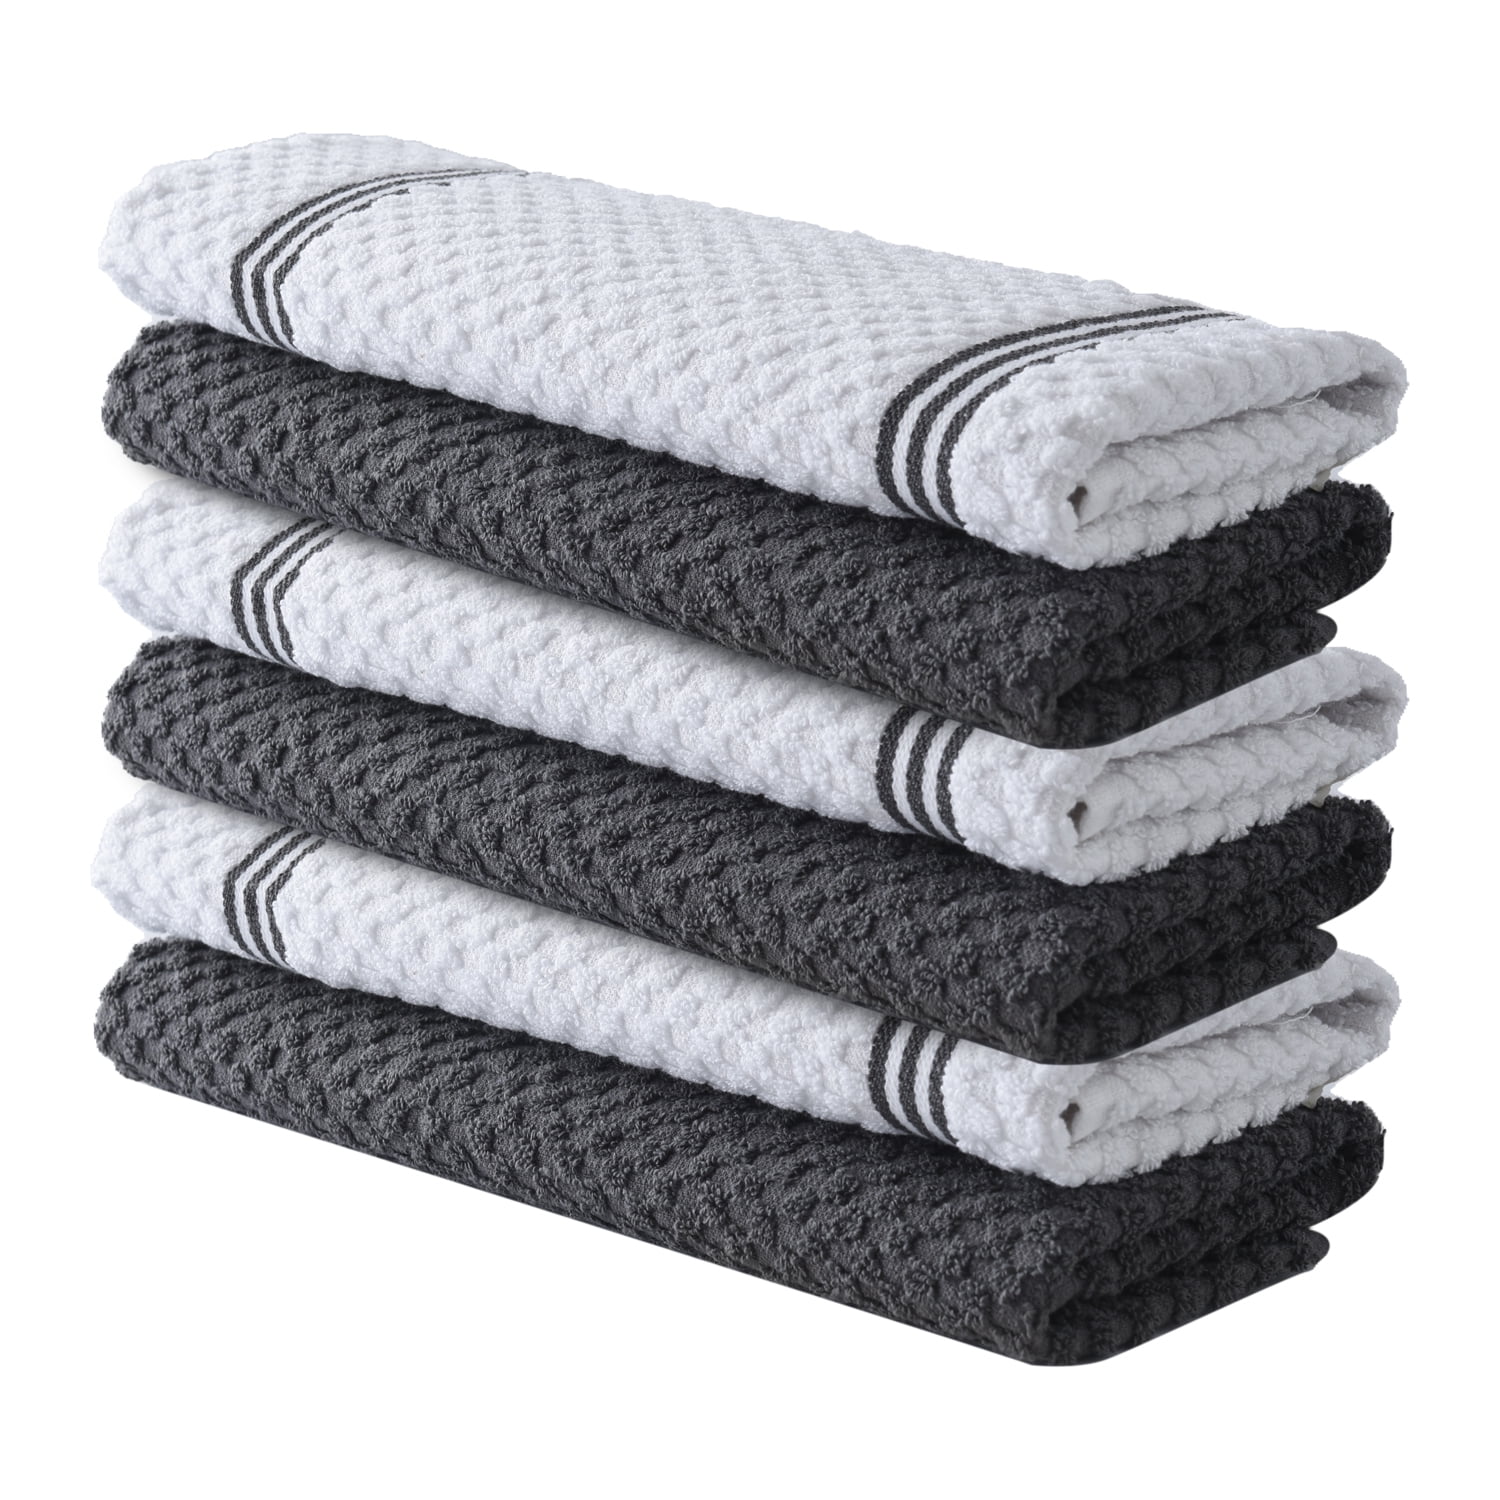 RIANGI Kitchen Hand Towels Set of 6 White/Black Dish Towels Highly  Absorbent 100% Cotton 16x26 Inches Checks White/Black Kitchen  Towels,Kitchen Hand